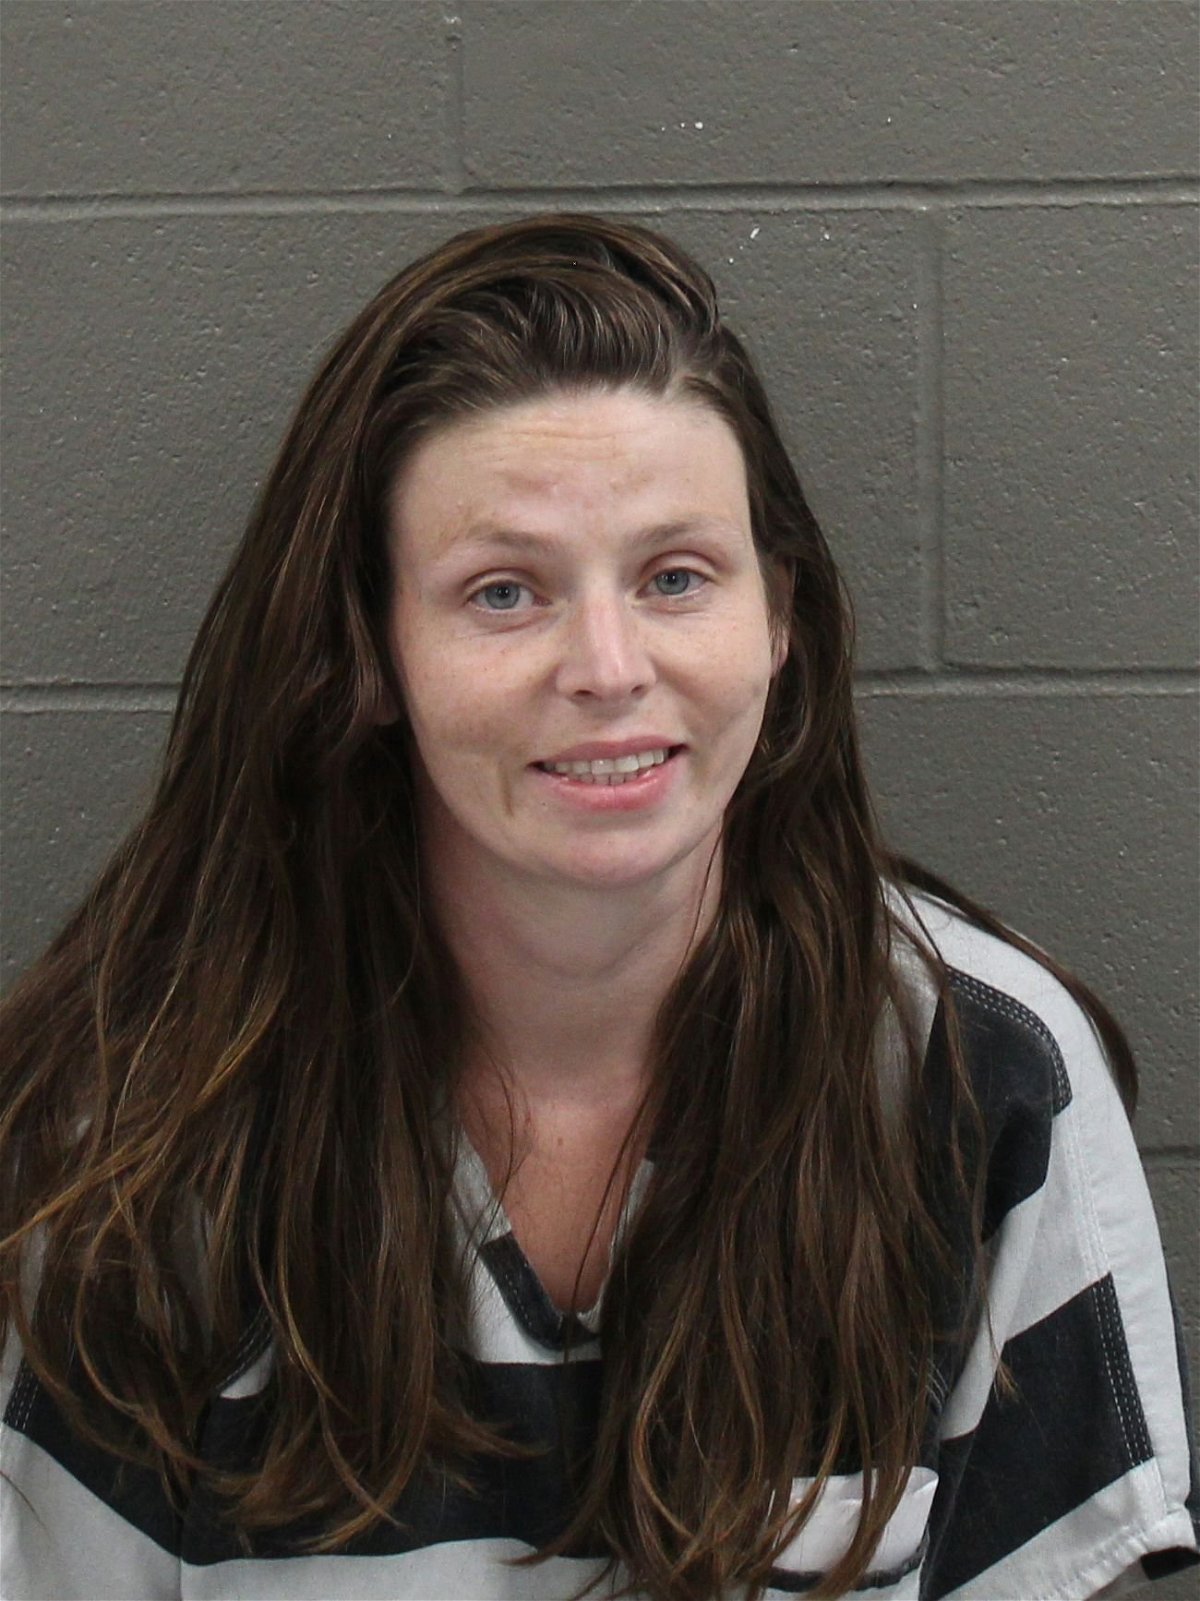 Krista Hardy is charged with first-degree domestic assault - serious physical injury and armed criminal action.